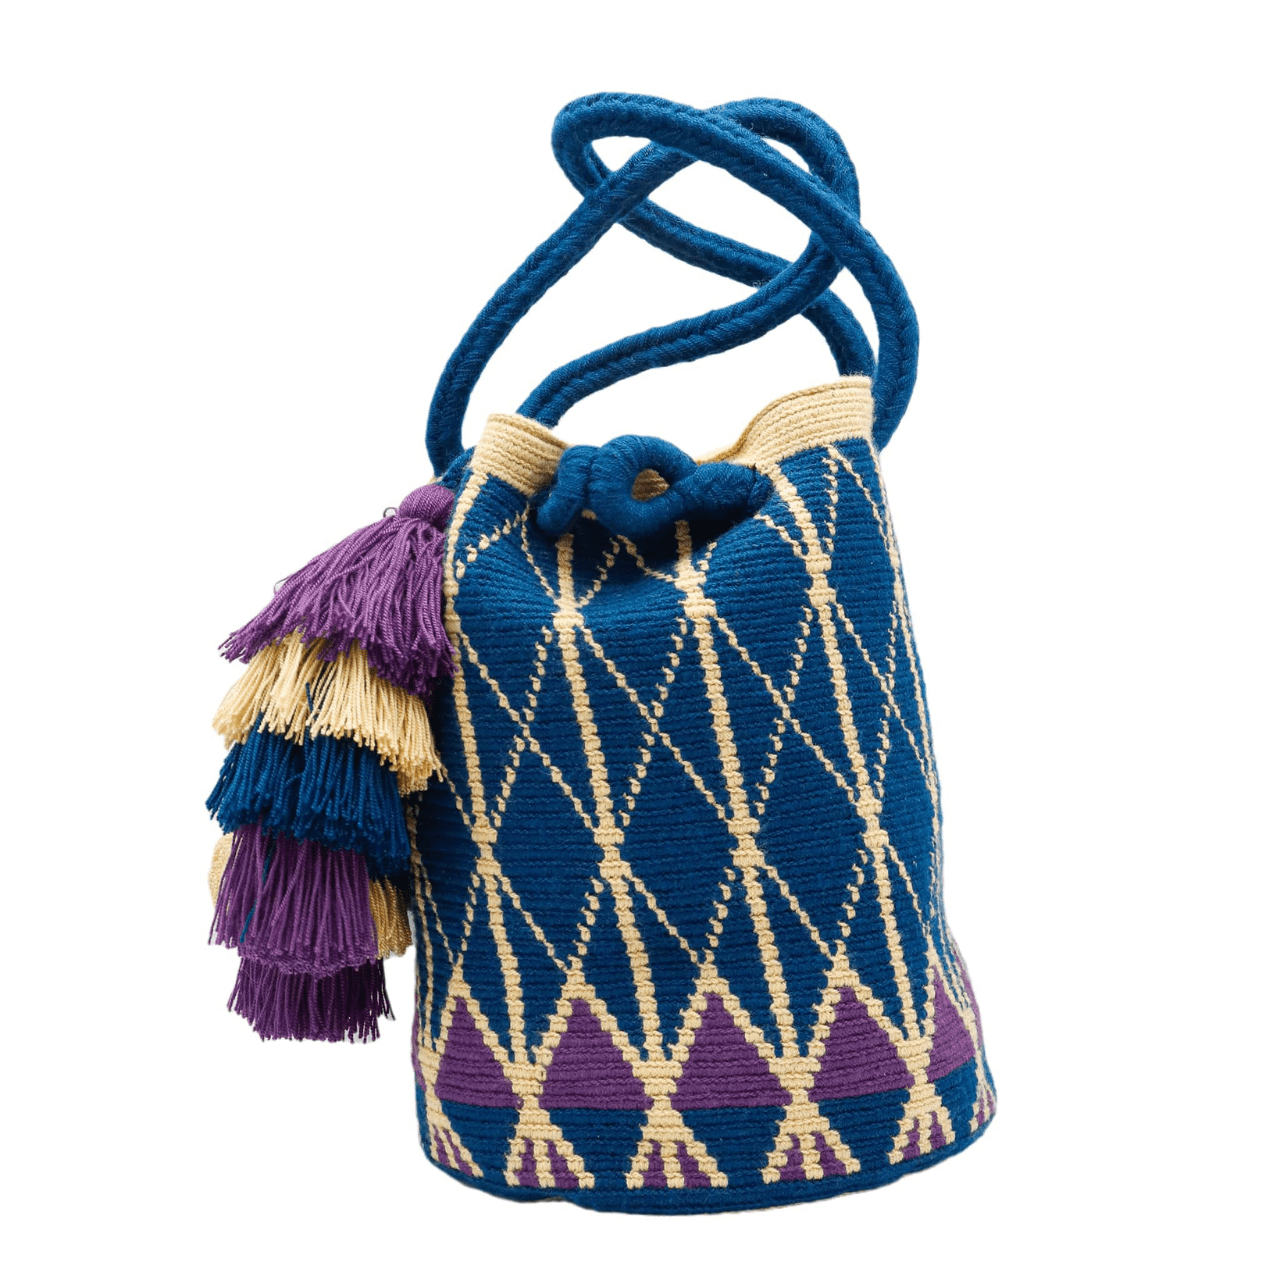 Kate Crochet Tote Bag - Large Size with Tassels & Pom Poms, Dark Ocean Blue, Plum, Beige. Unique accessory for travel and work.